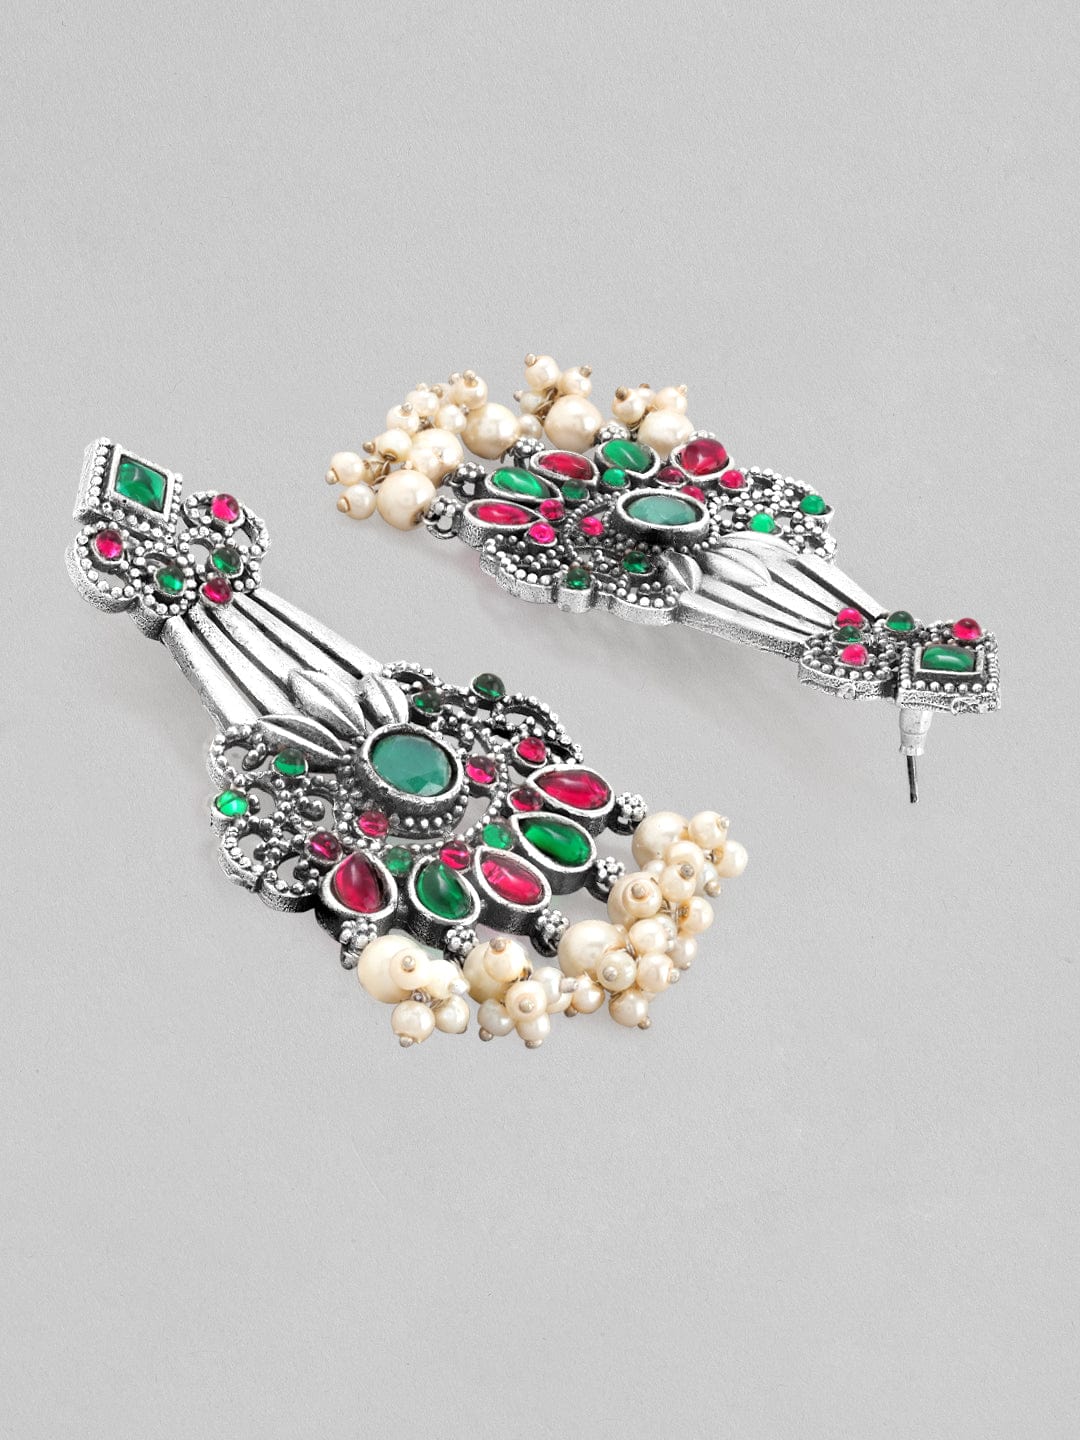 Rubans Silver Oxidised Drop Earrings With Studded Pink And Green Stones Earrings